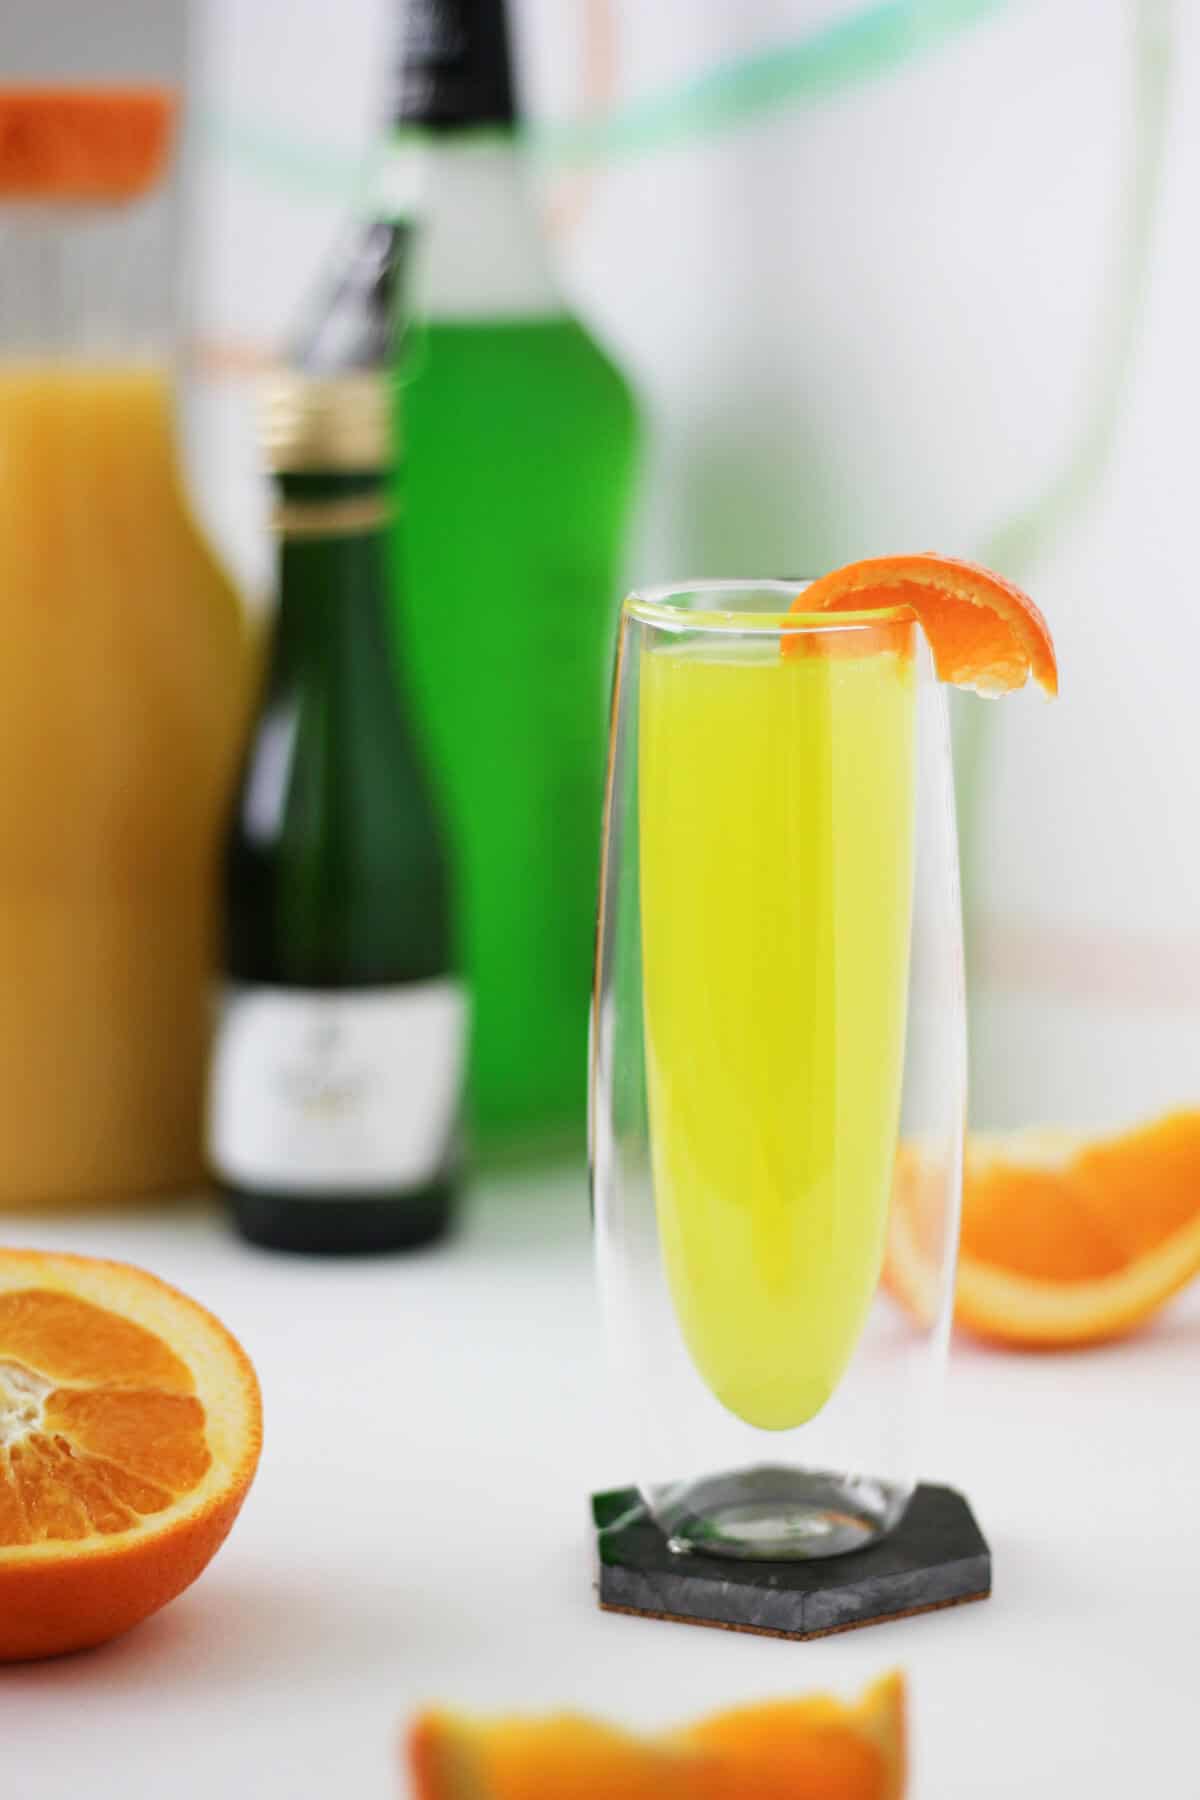 Tall clear glass with insulated walls with a lemon-lime colored liquid, garnished with a slice of tangerine on the rim. There are orange slices, as well as the juice, champagne and liqueur bottles, in the background.